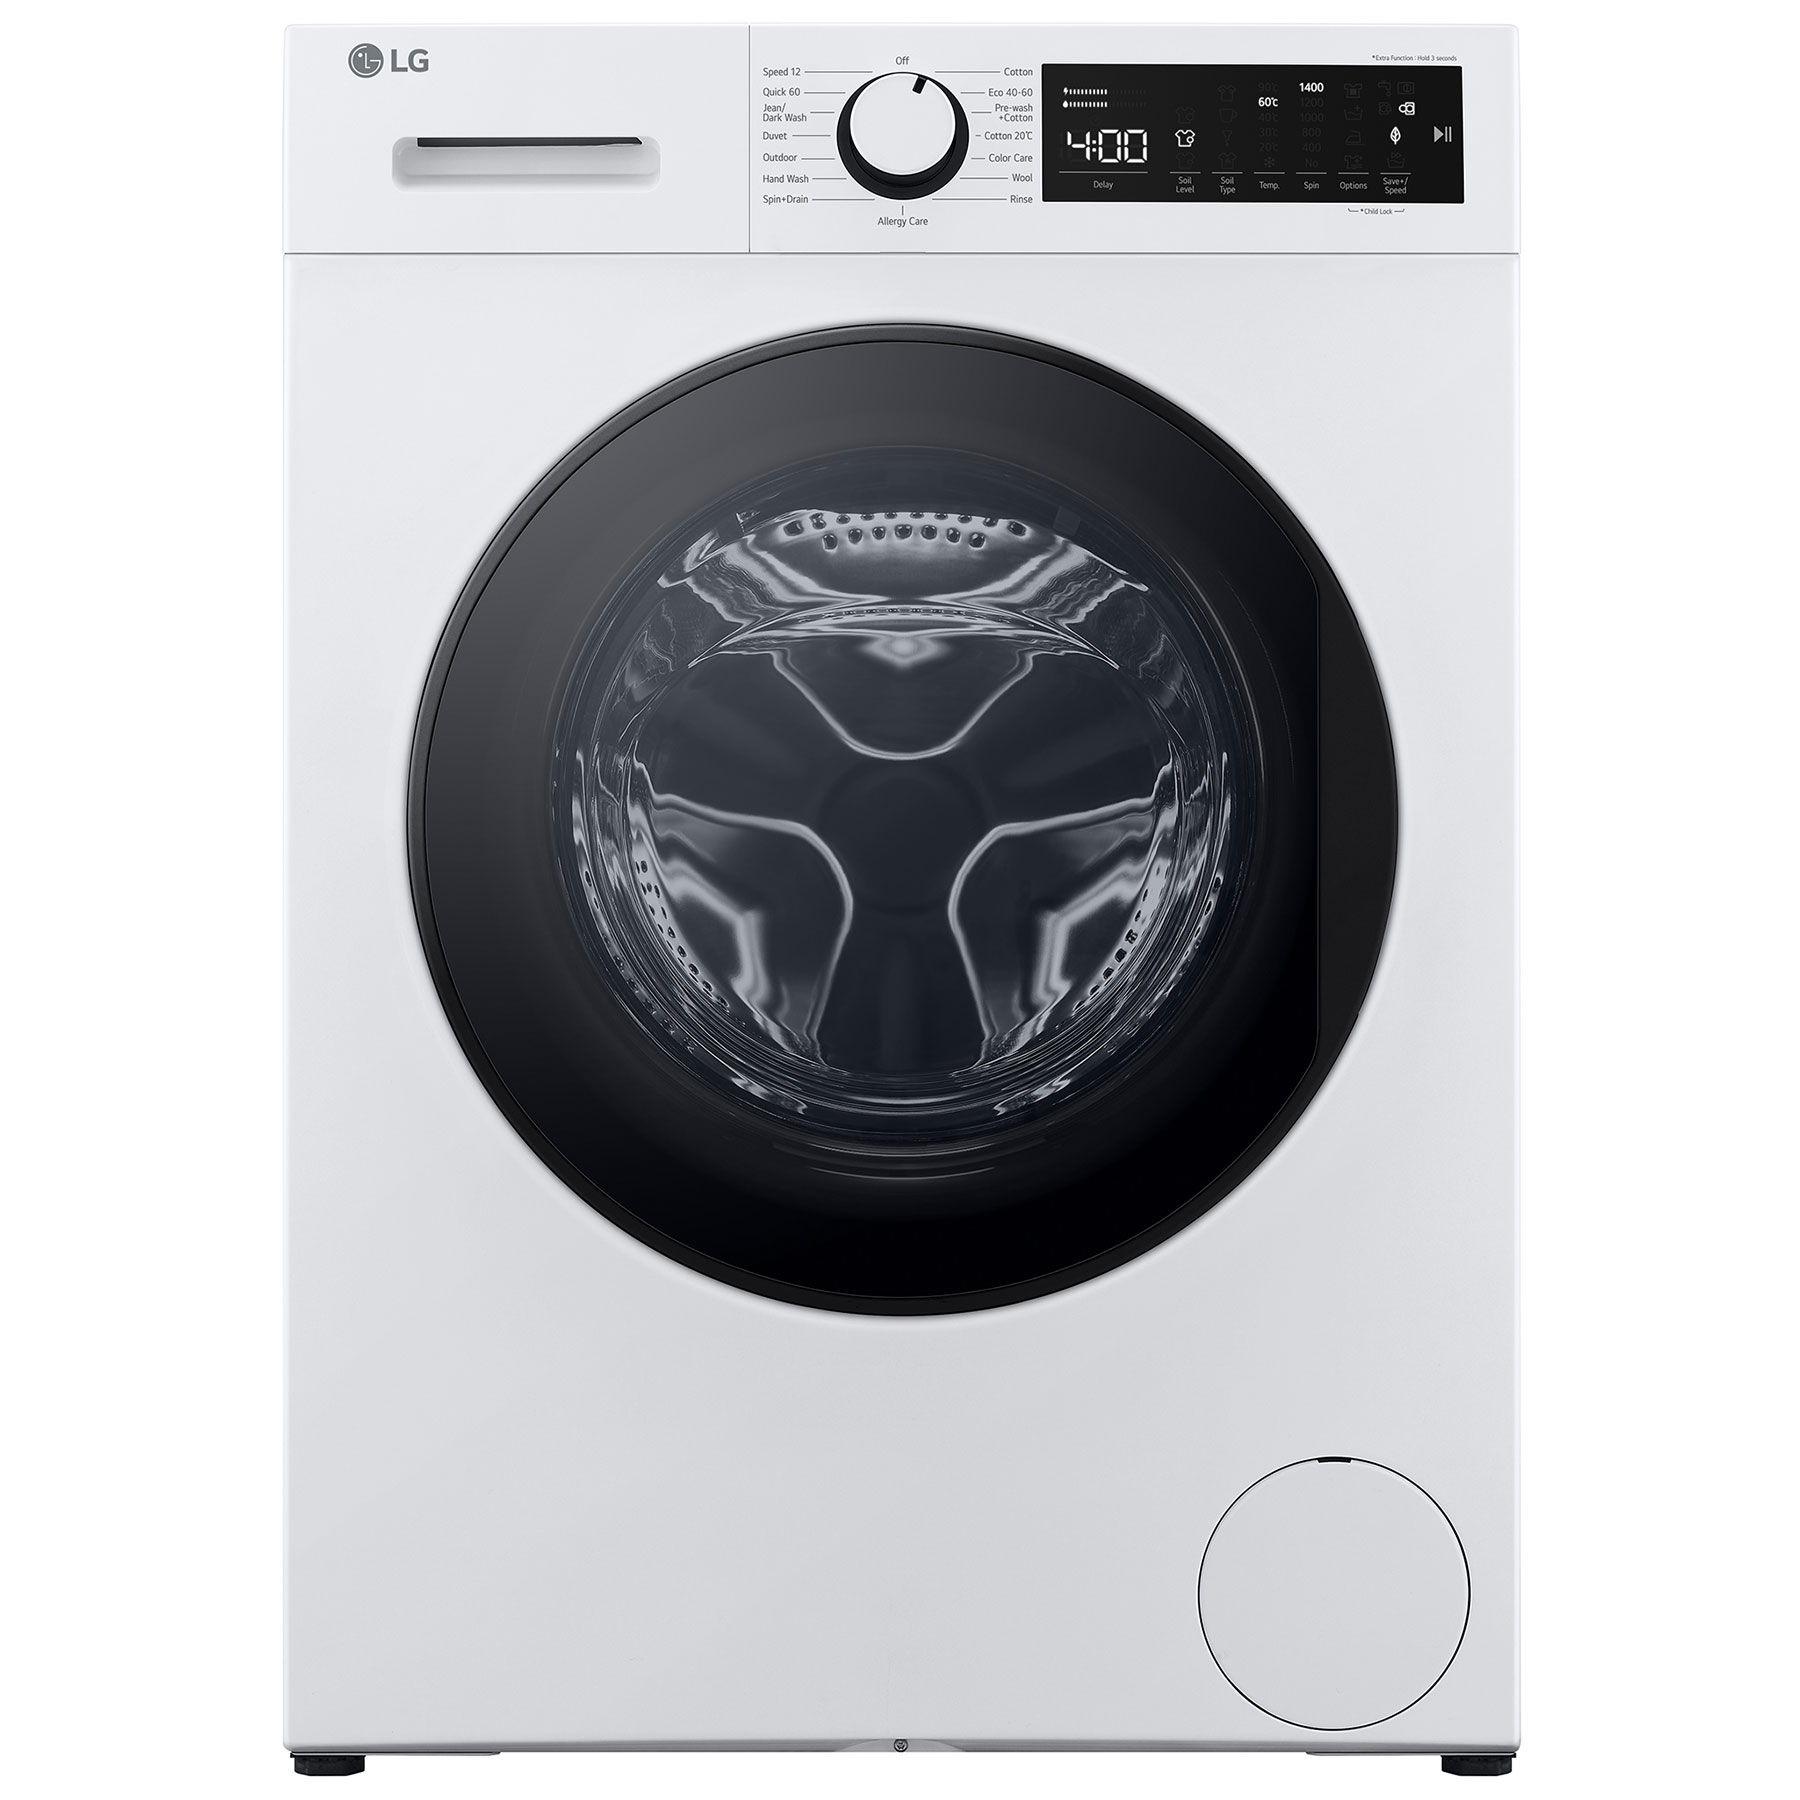 Image of LG F4T209WSE Washing Machine in White 1400rpm 9kg A Rated